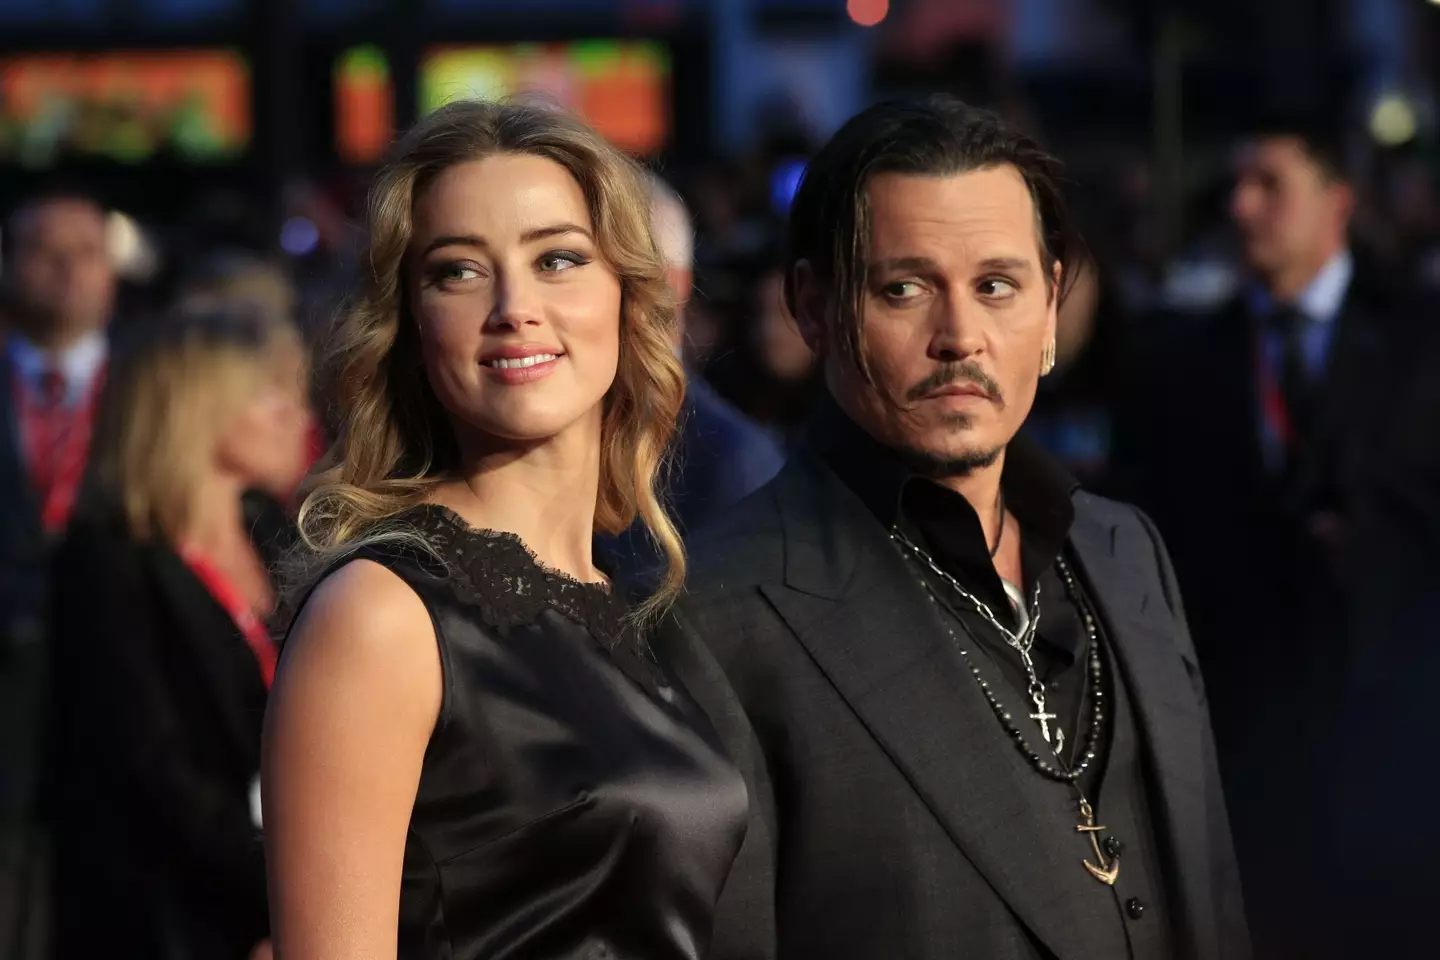 Depp is suing Heard over an article in the Washington Post from 2019 (